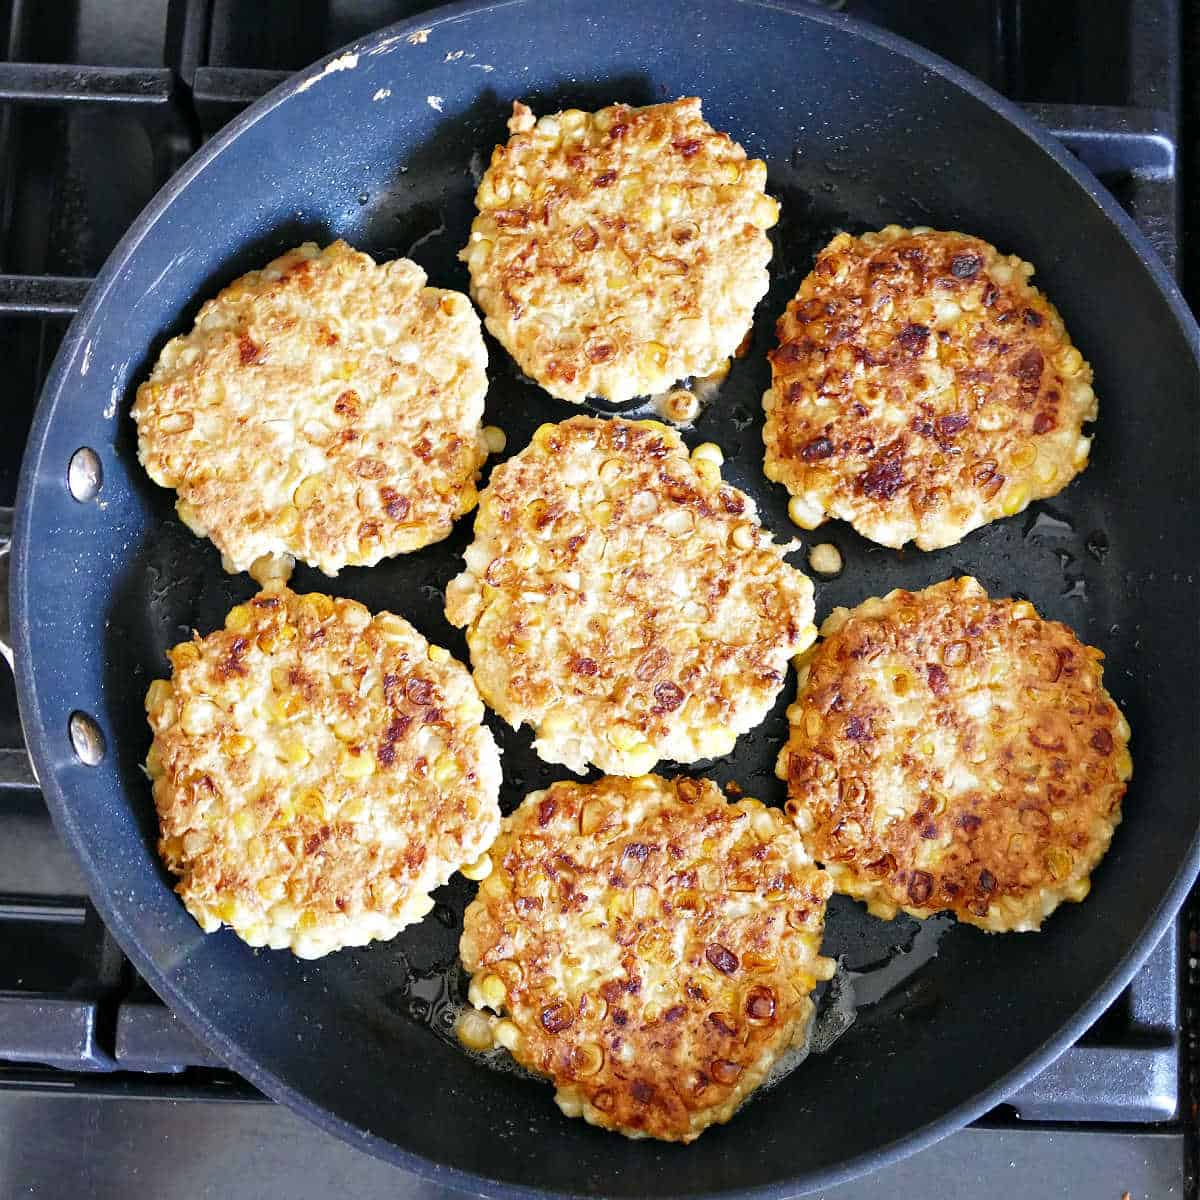 corn fritters being fried in olive oil in a skillet on the stove